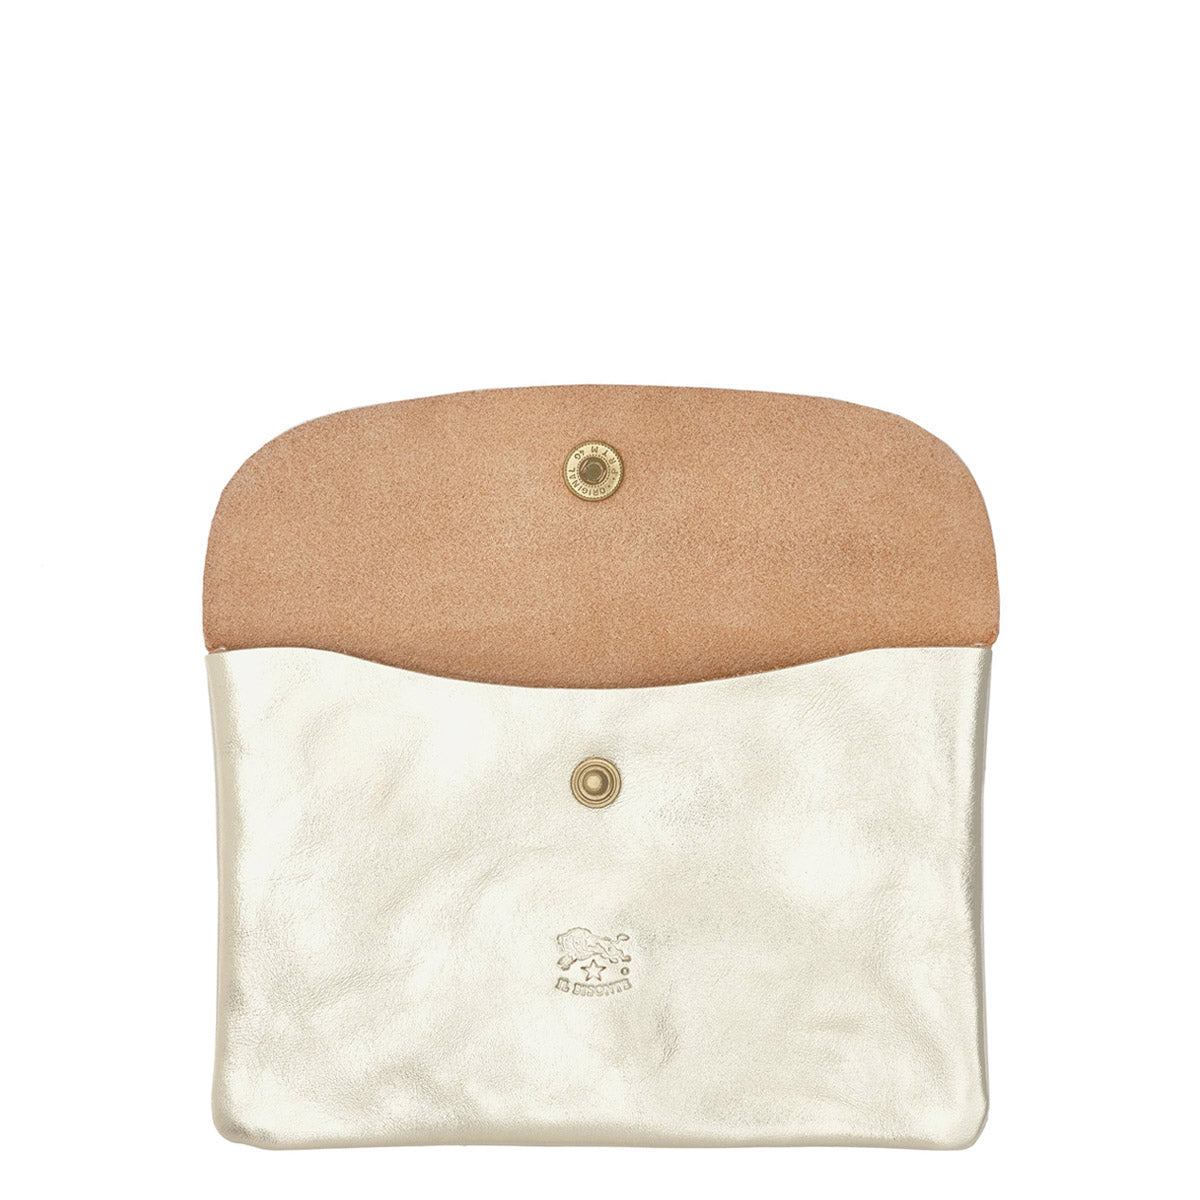 Il Bisonte Large Envelope Pouch - Platino